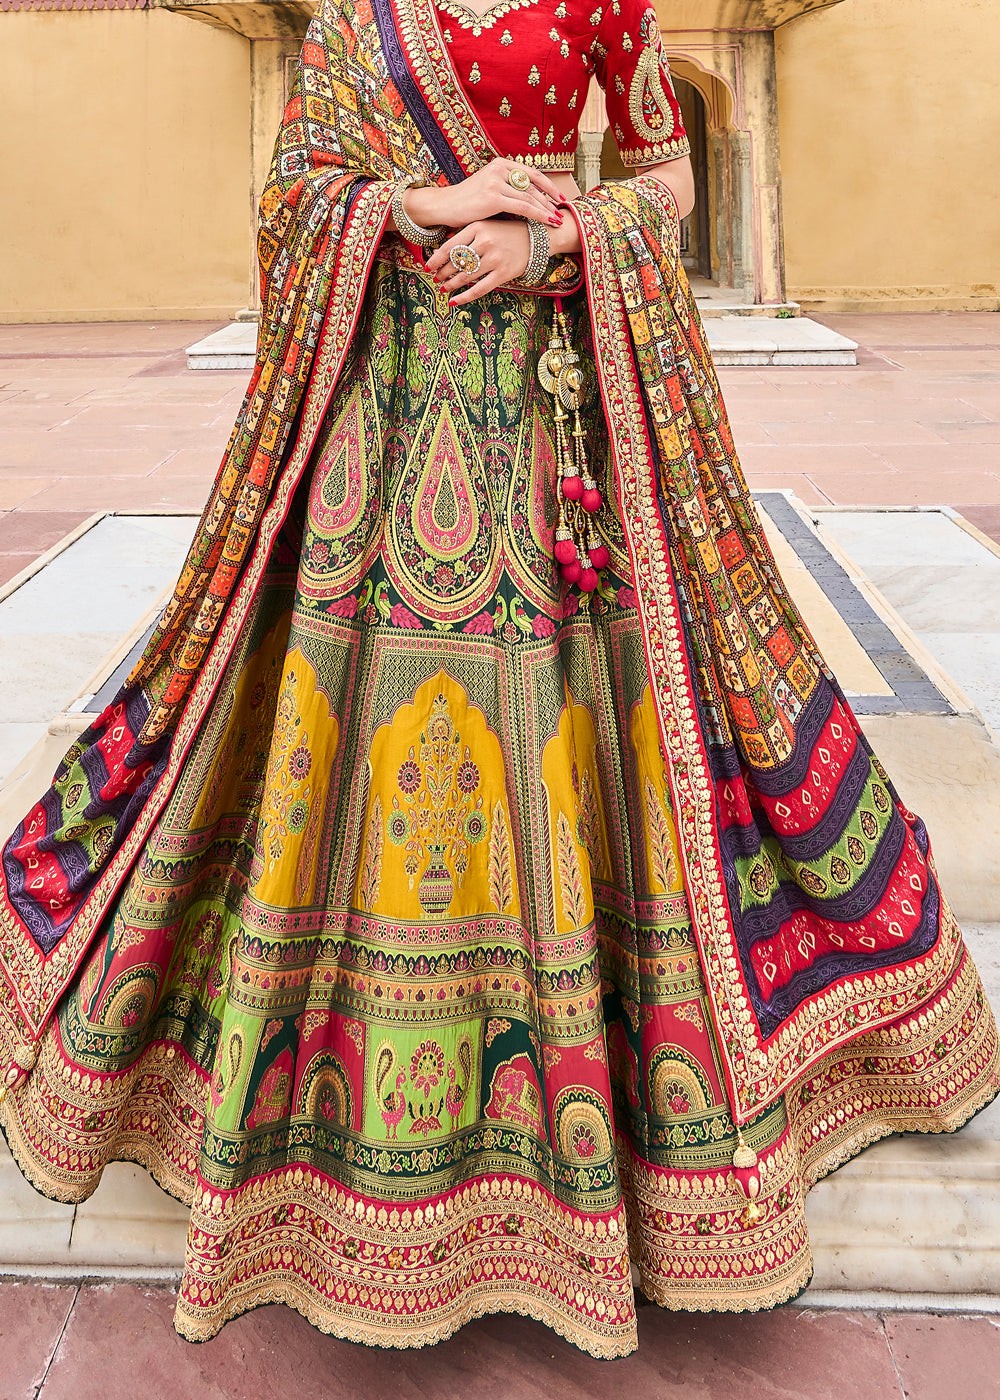 Pretty yellow lehenga with red dupatta for an engagement. See more on  wedmegood.com #wedmegood #i… | Indian wedding fashion, Indian wedding  gowns, Ceremony dresses